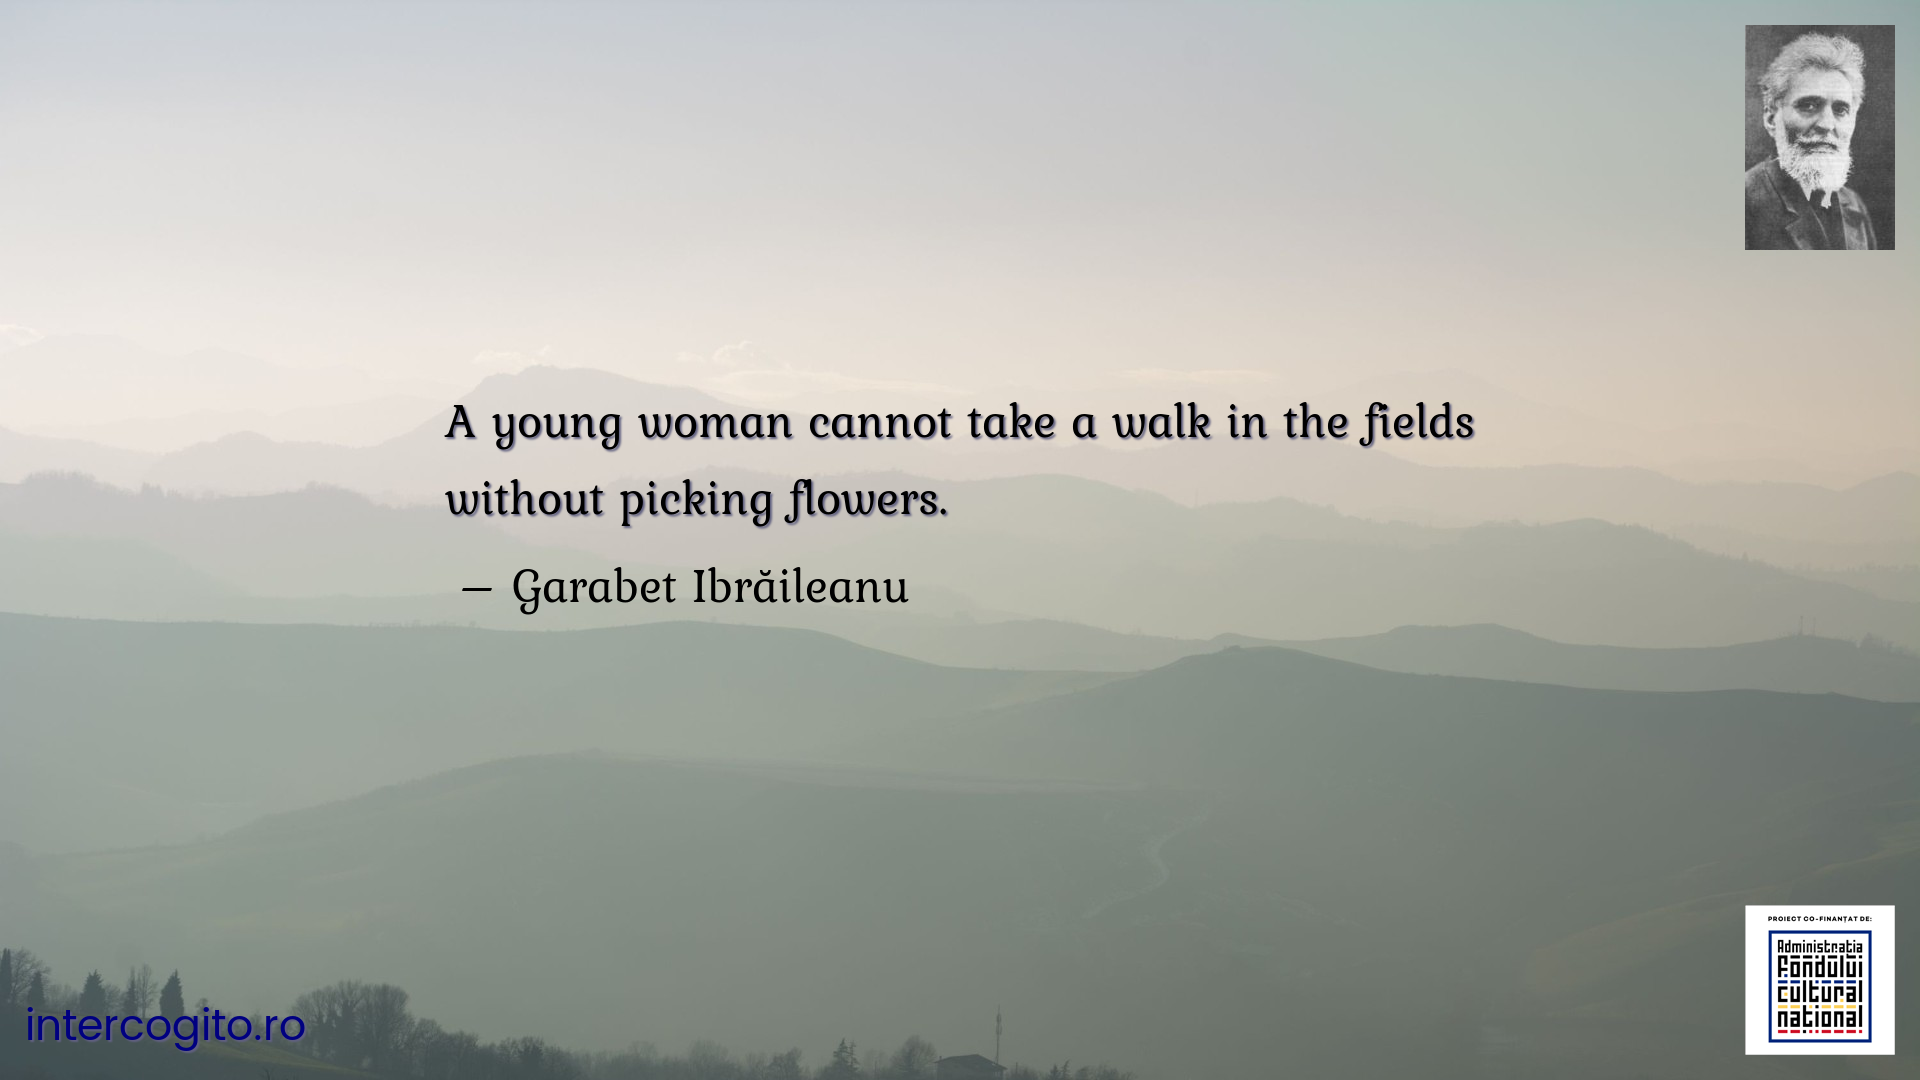 A young woman cannot take a walk in the fields without picking flowers.